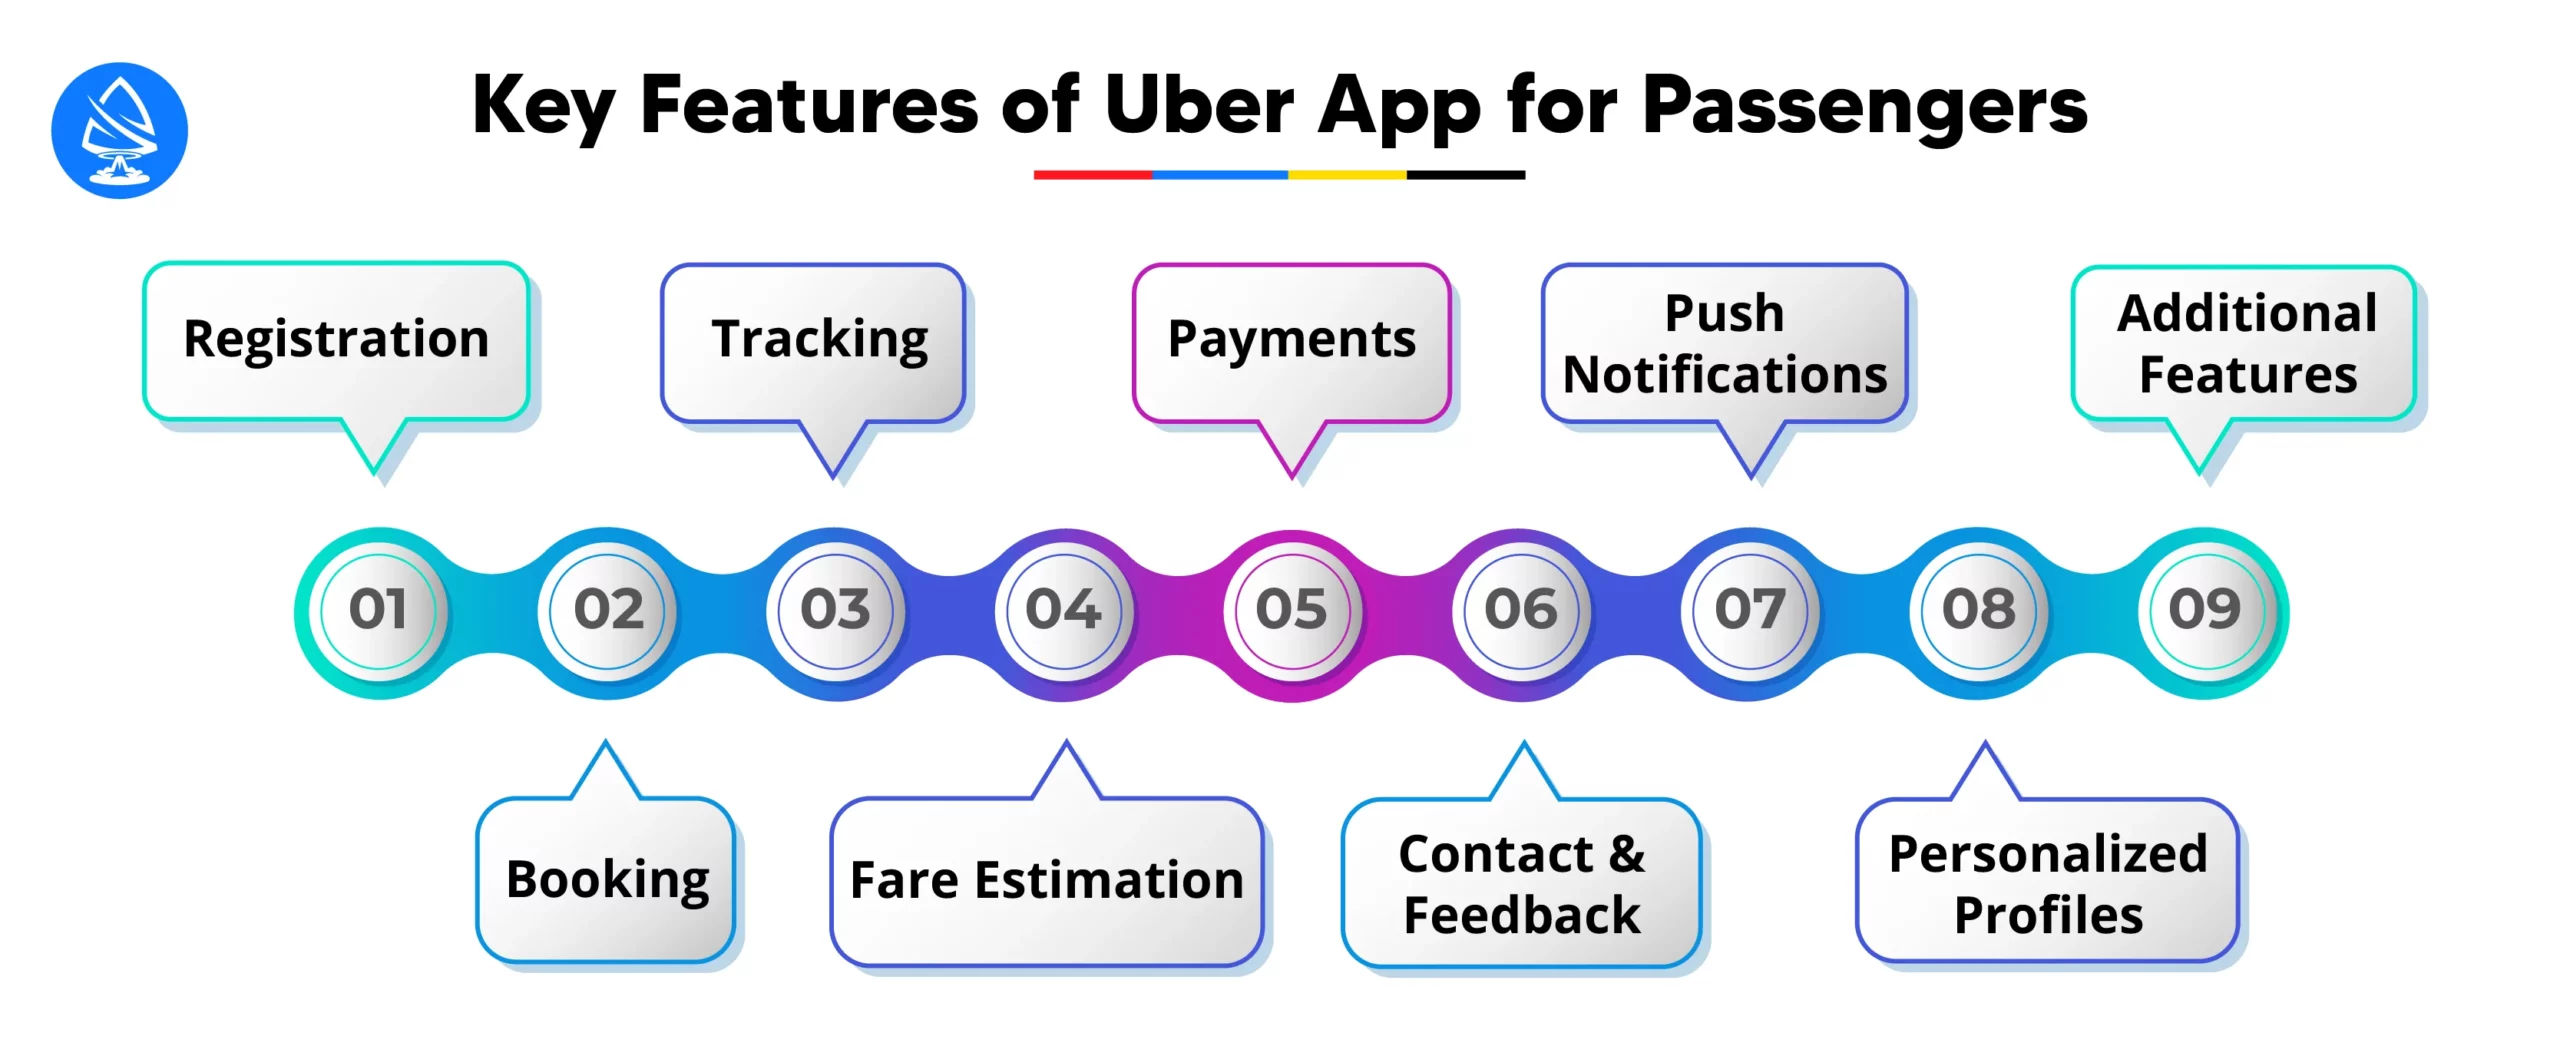 Key Features of Taxi Booking Apps like Uber for Passengers